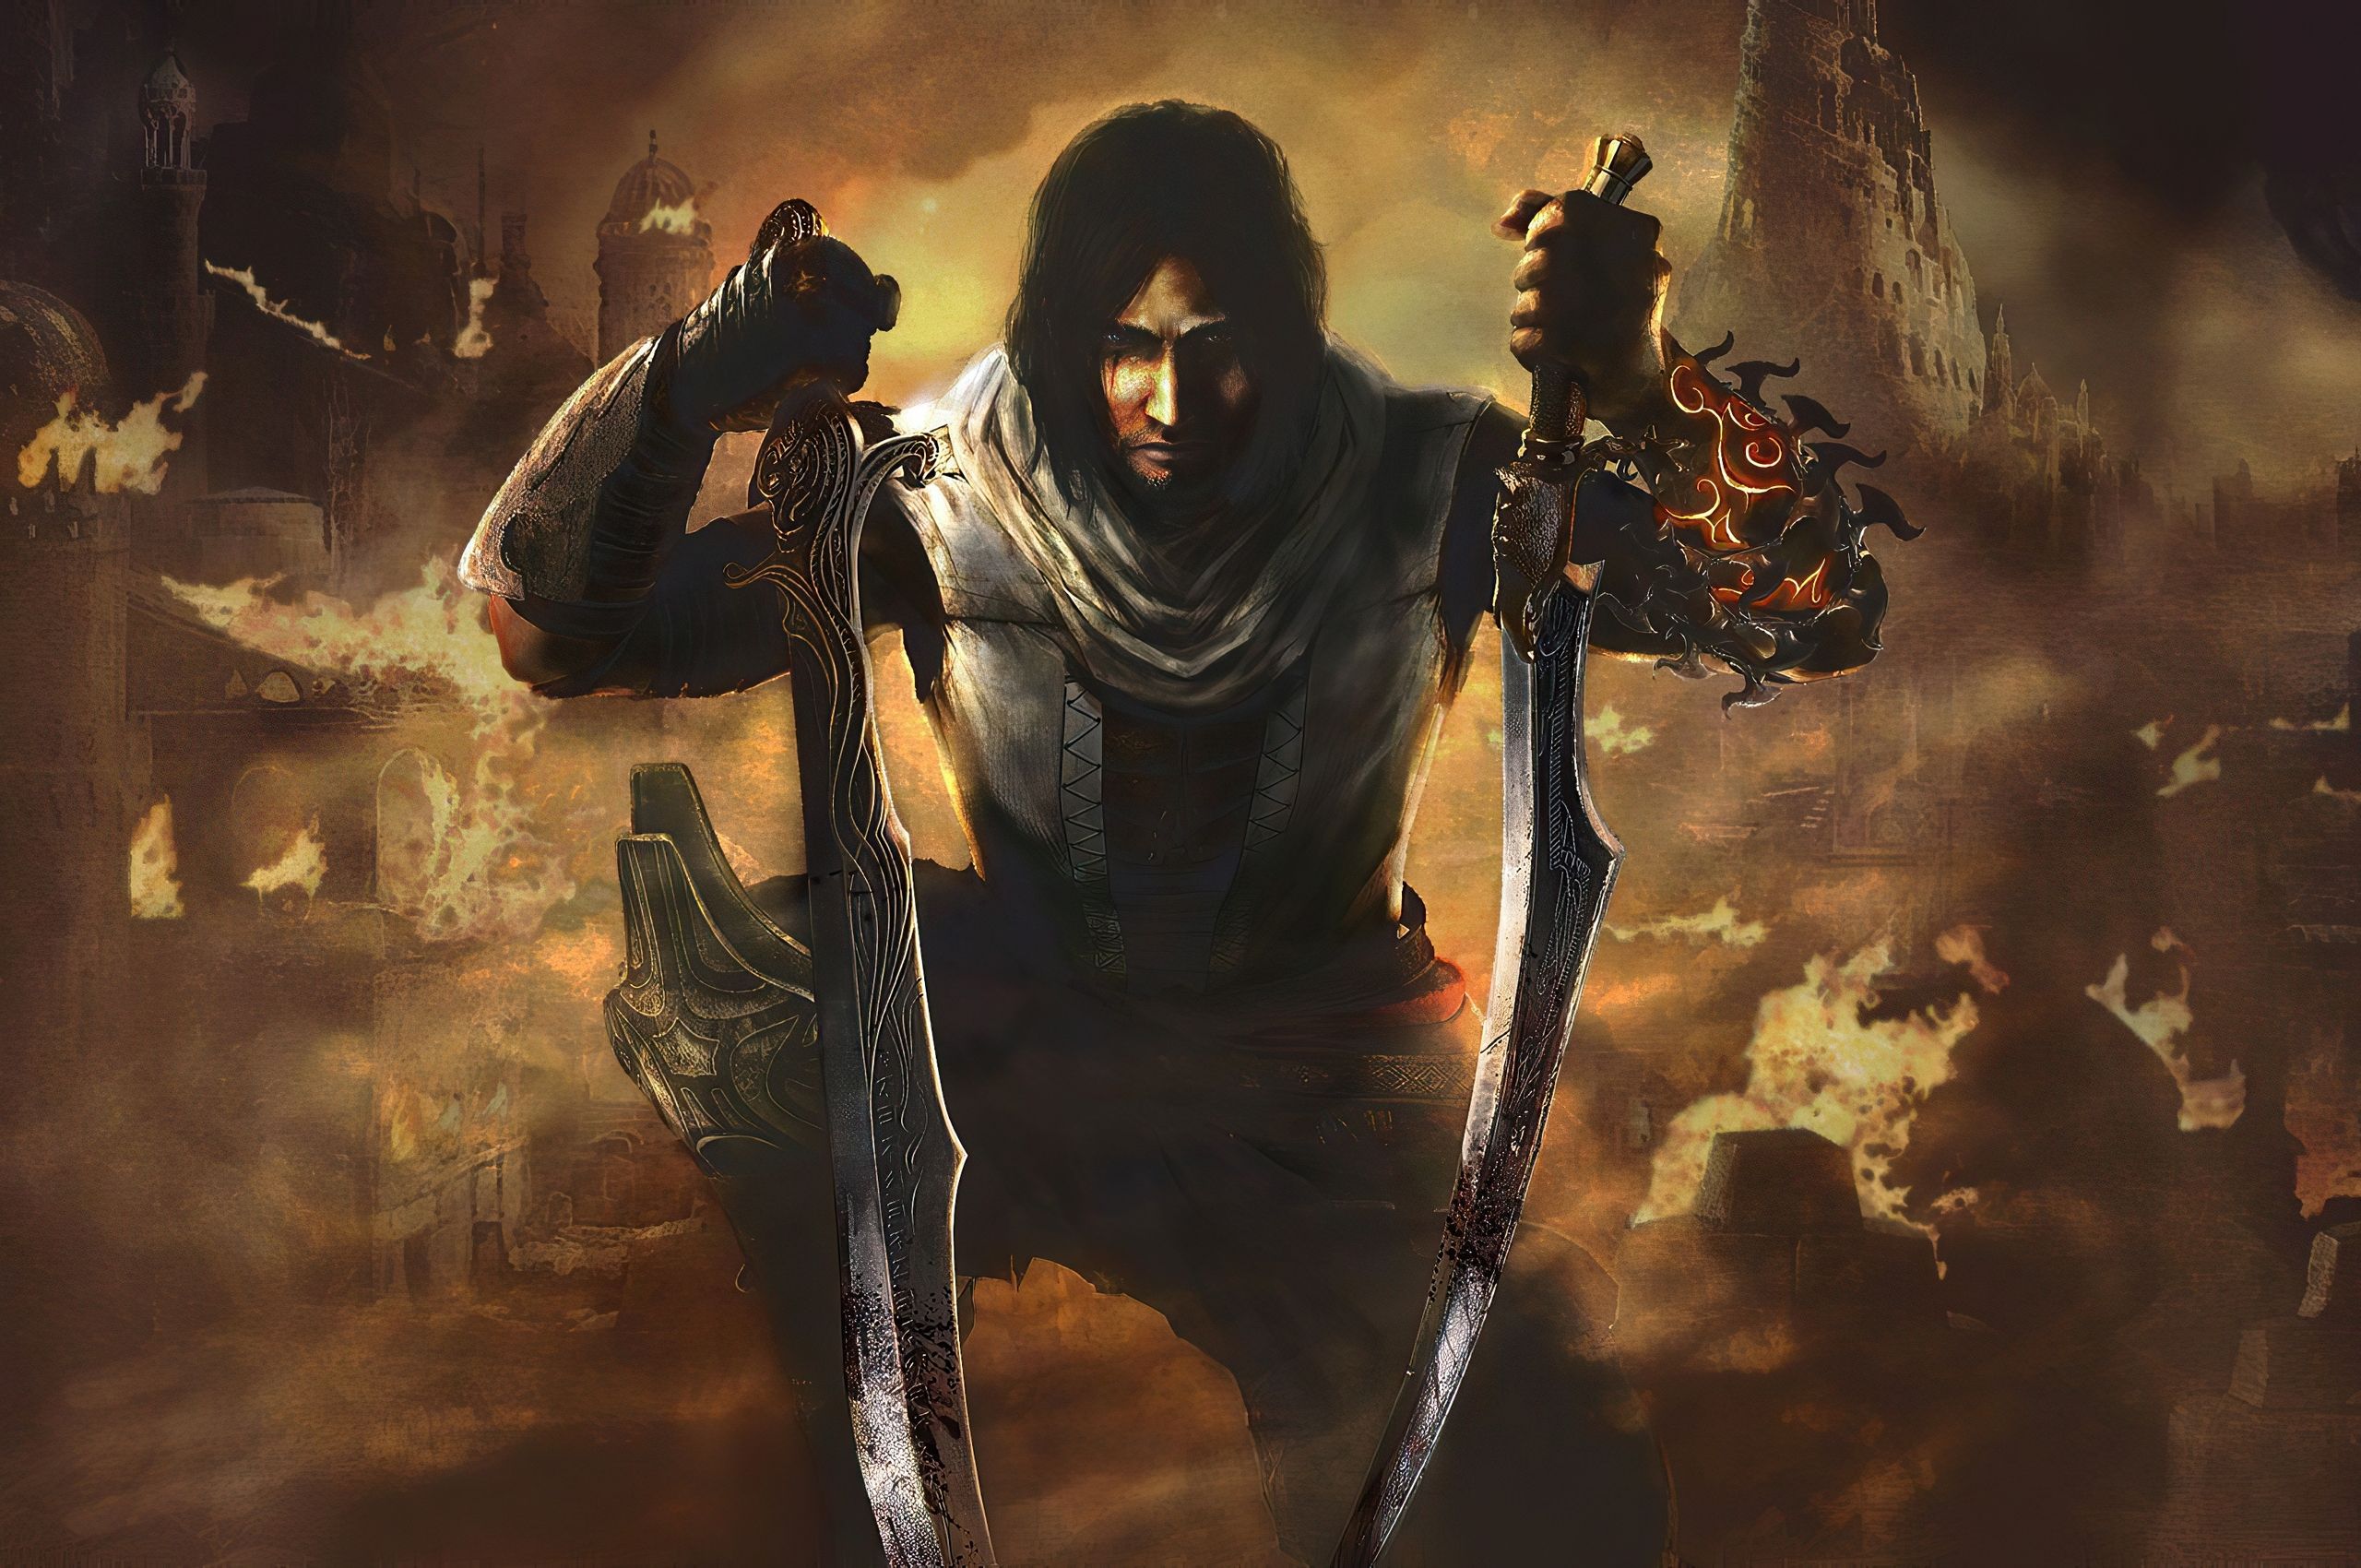 Prince of Persia Game Tissue Key Wallpapers